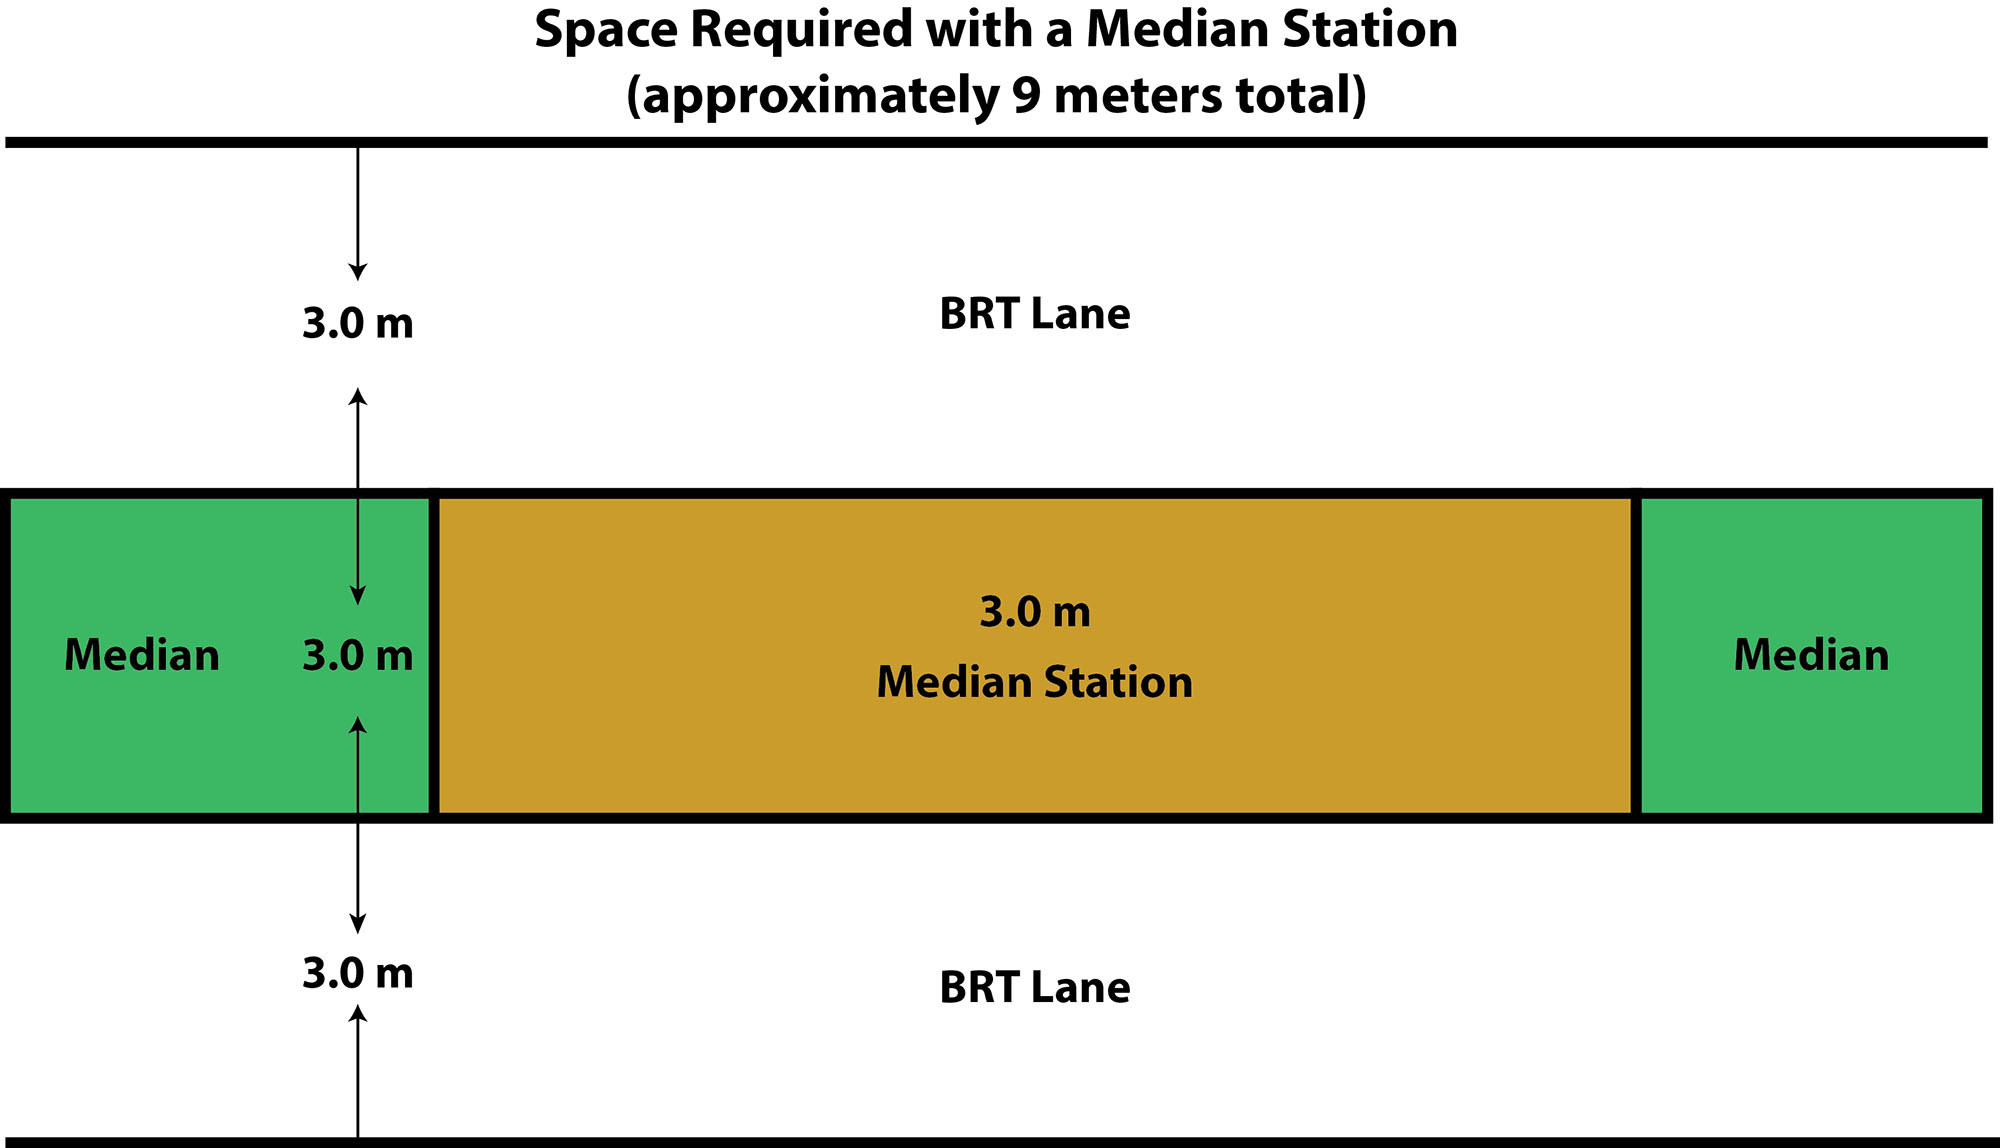 Fig. 22.63 Relative space requirements for roadway configurations with median stations.